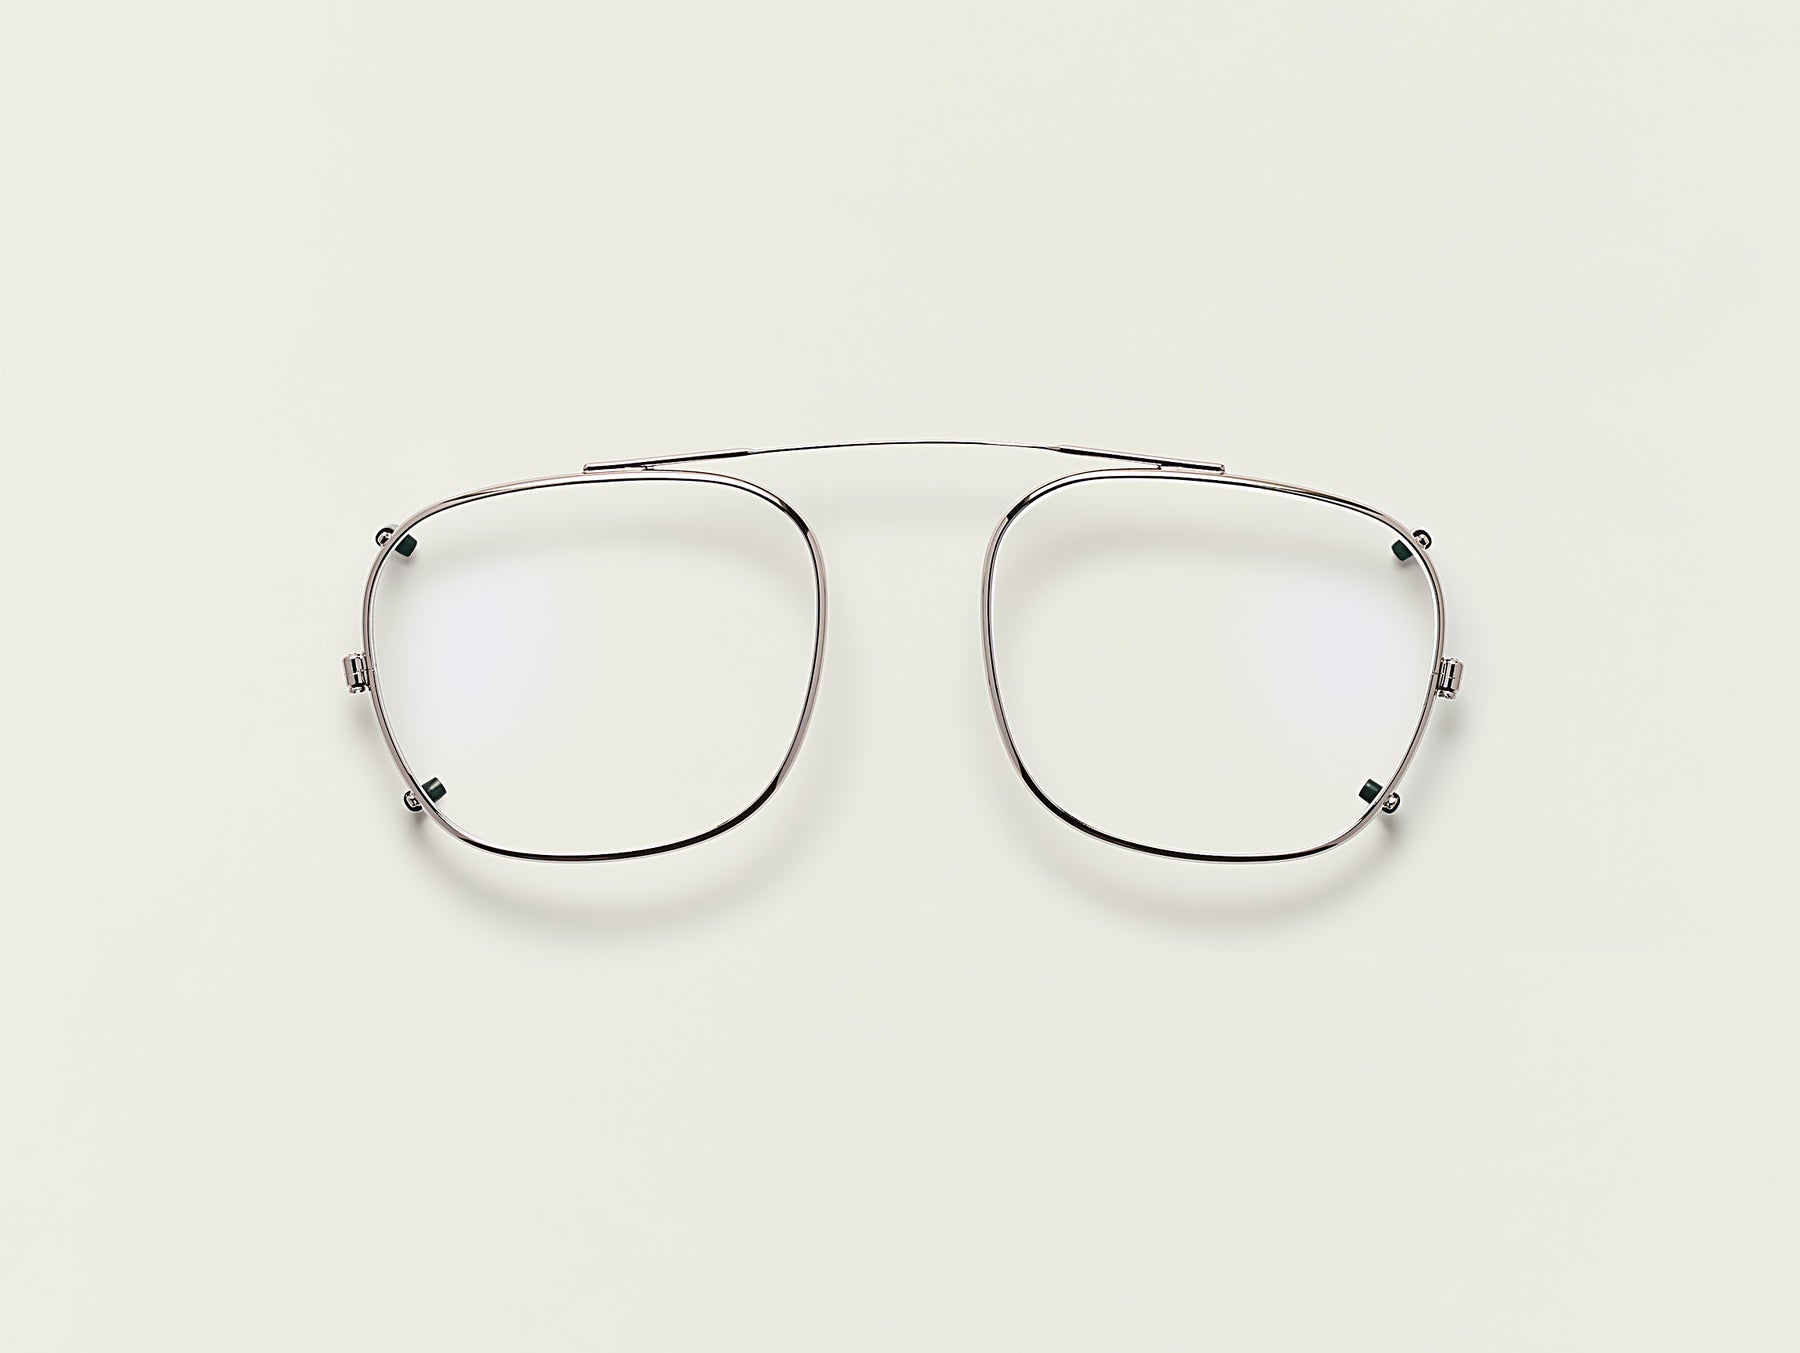 The SCHLEP CLIP in Gunmetal with Blue Protect Lenses